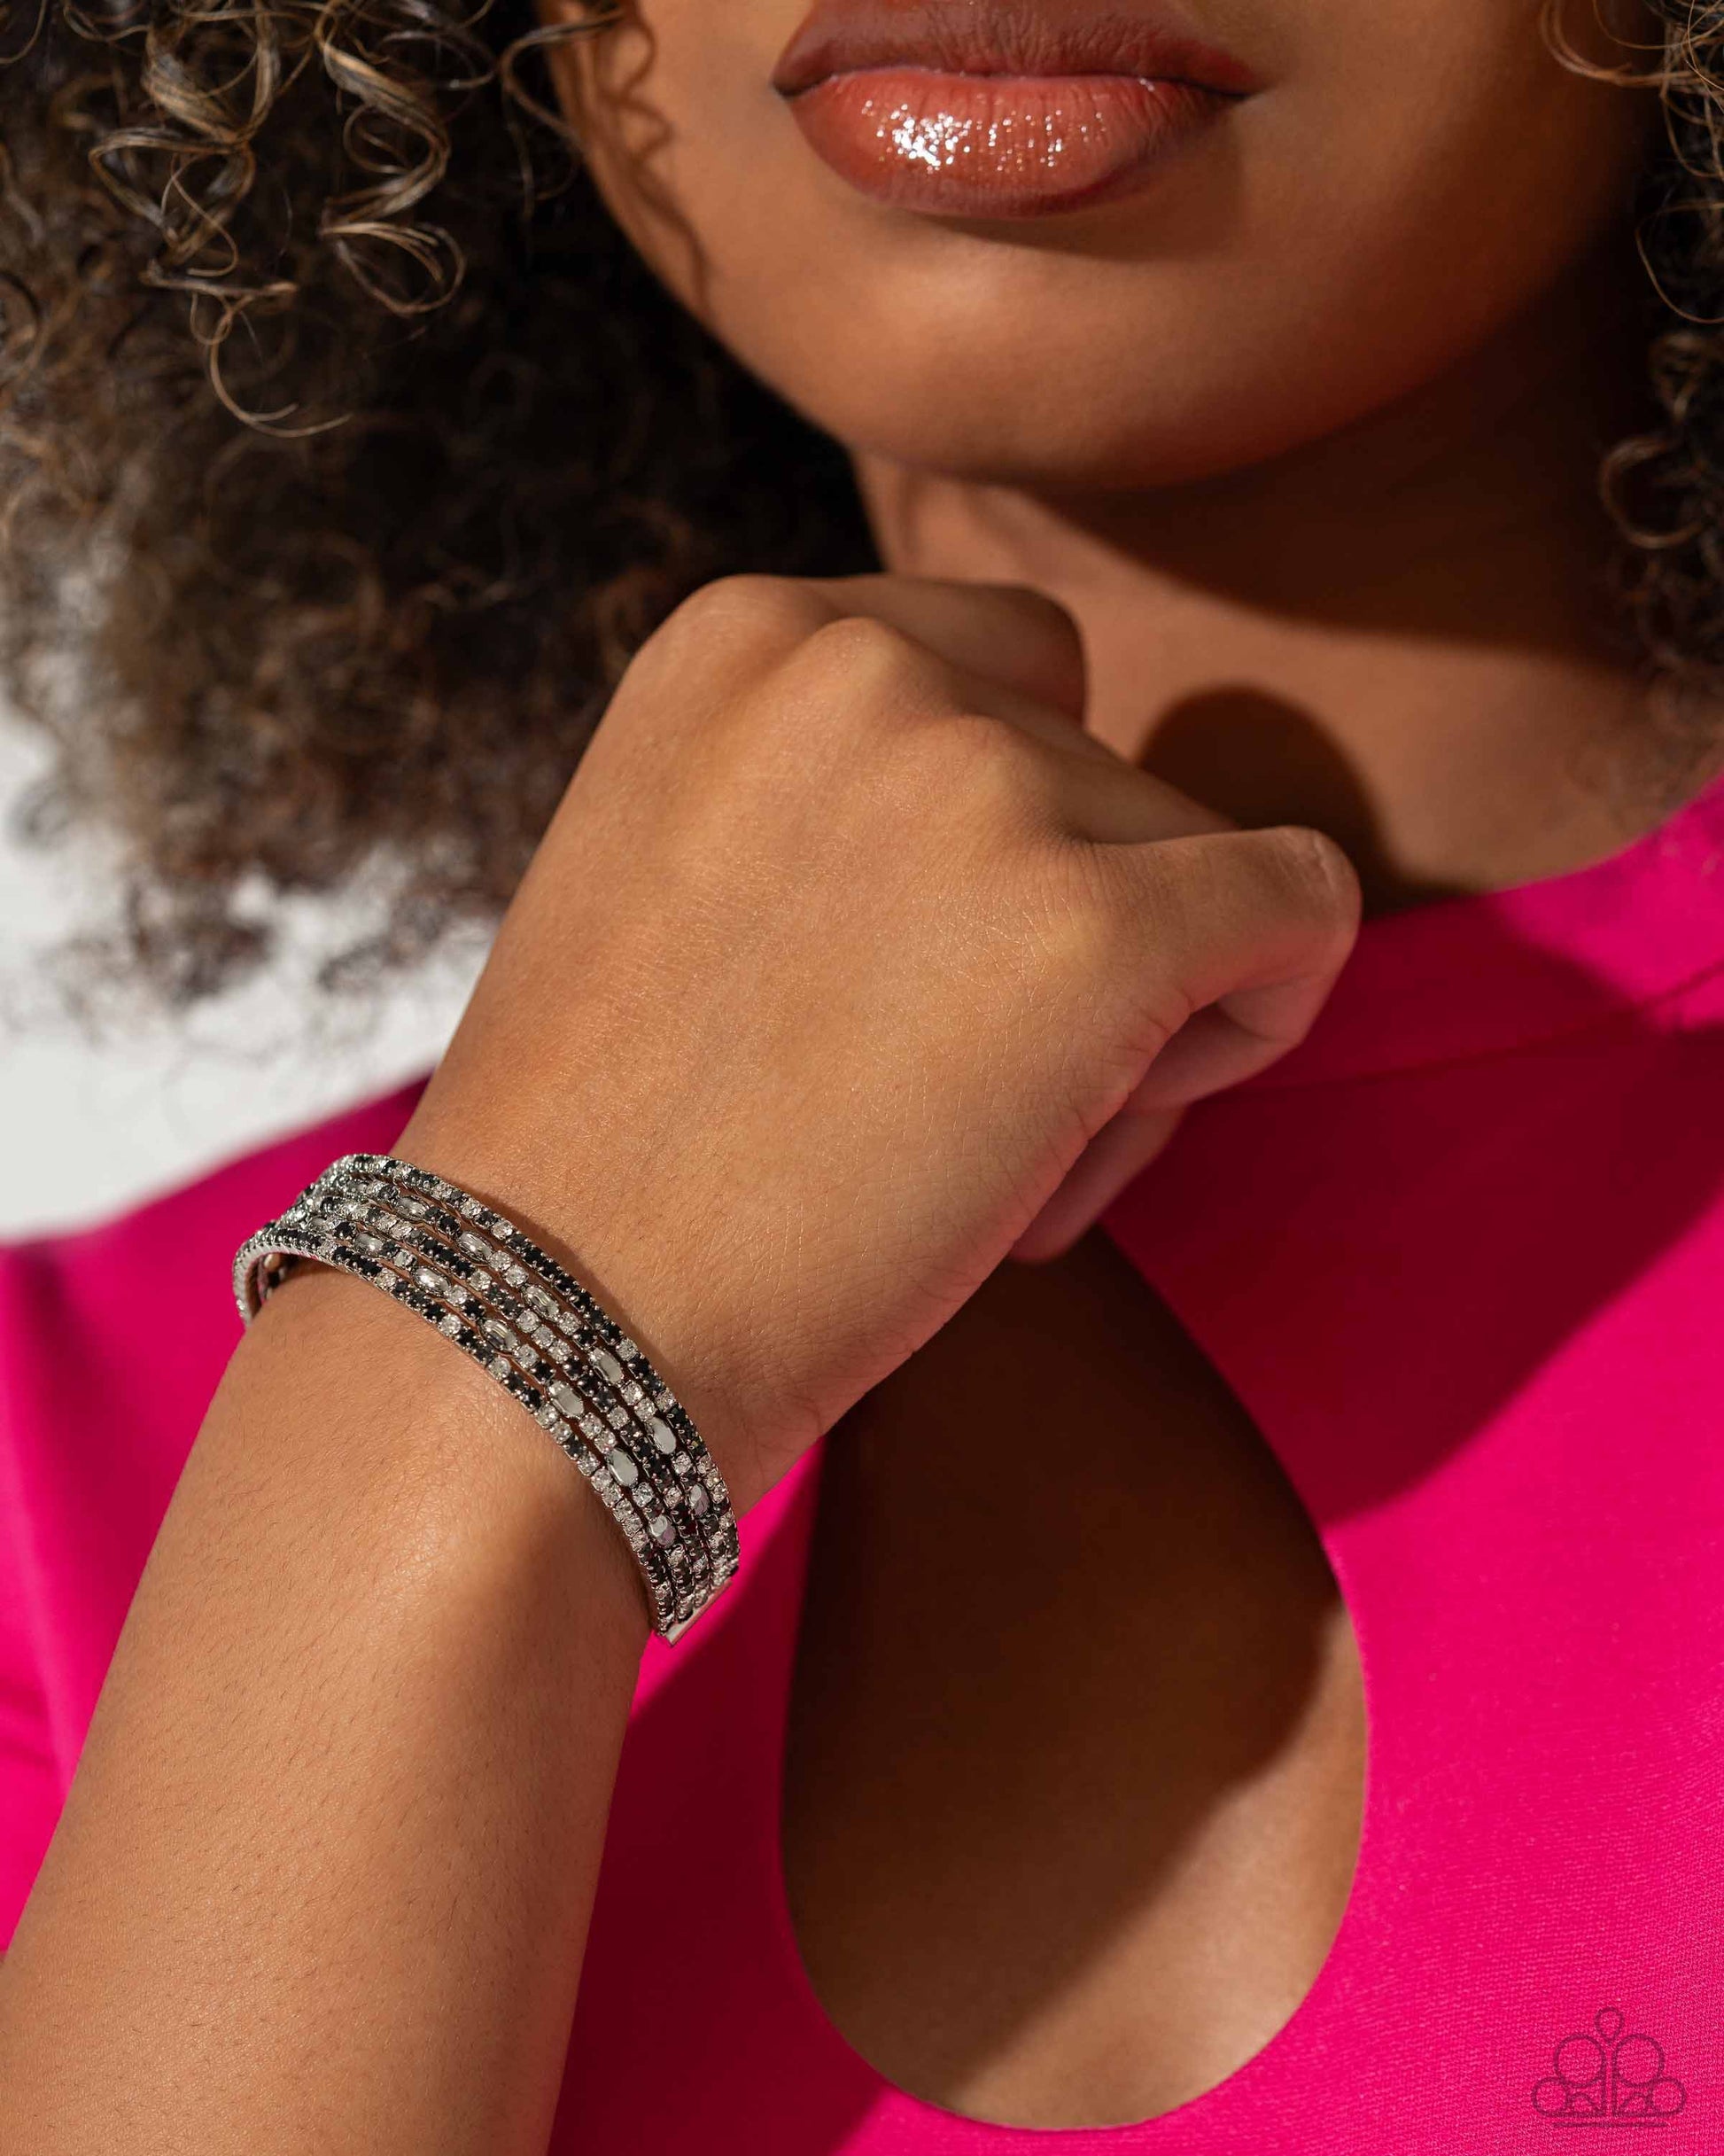 Endless Energy Black Cuff Bracelet - Paparazzi Accessories  Four strands of dazzling white, black, and smoky rhinestones flank shiny silver accents, coalescing into a sparkly layered cuff around the wrist.  Sold as one individual bracelet.  SKU: P9DA-BKXX-161XX